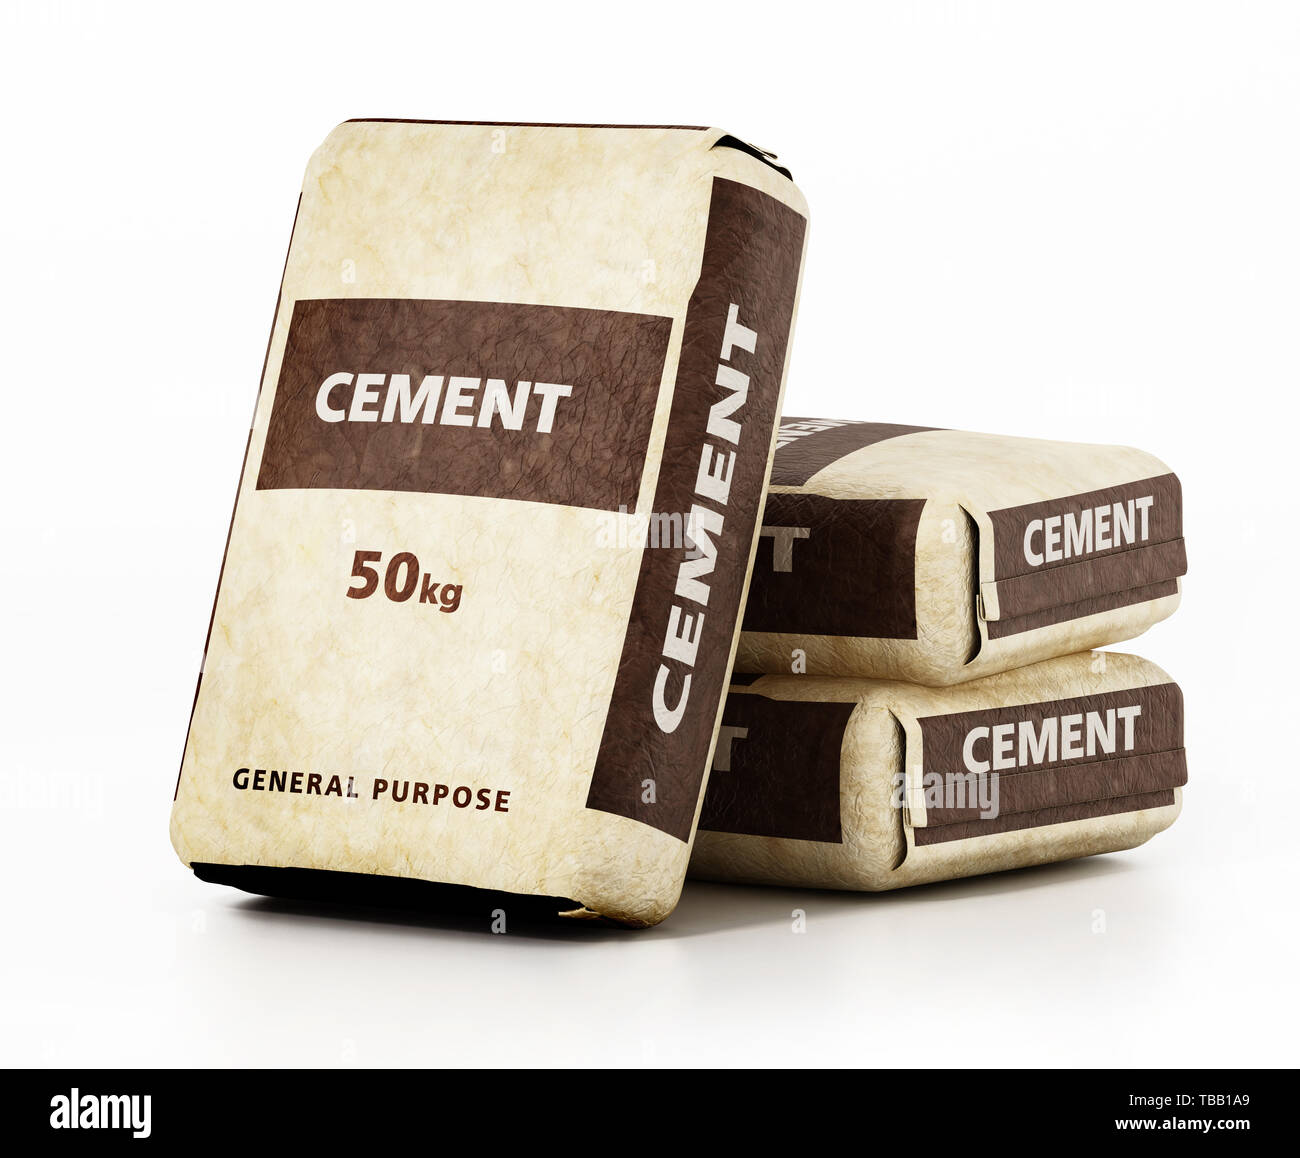 Cement bags with generic package design isolated on white background. 3D illustration. Stock Photo